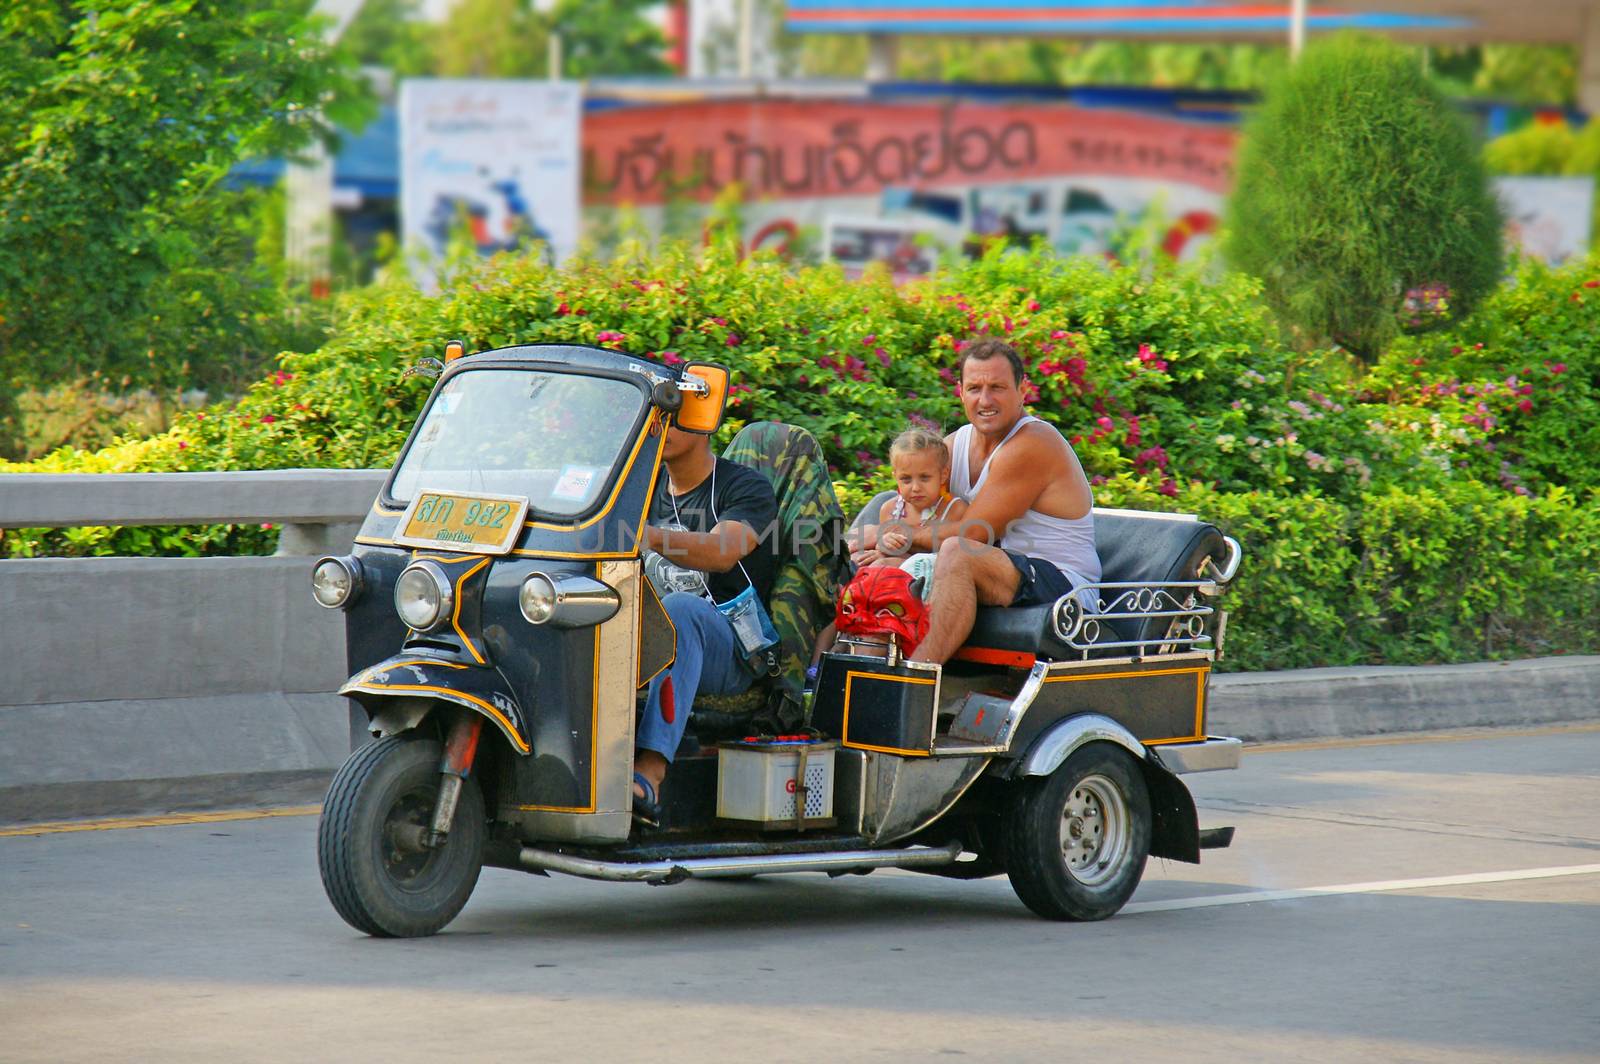 Unidentified tourist with traditional tuk-tuk in Thailand. by mranucha